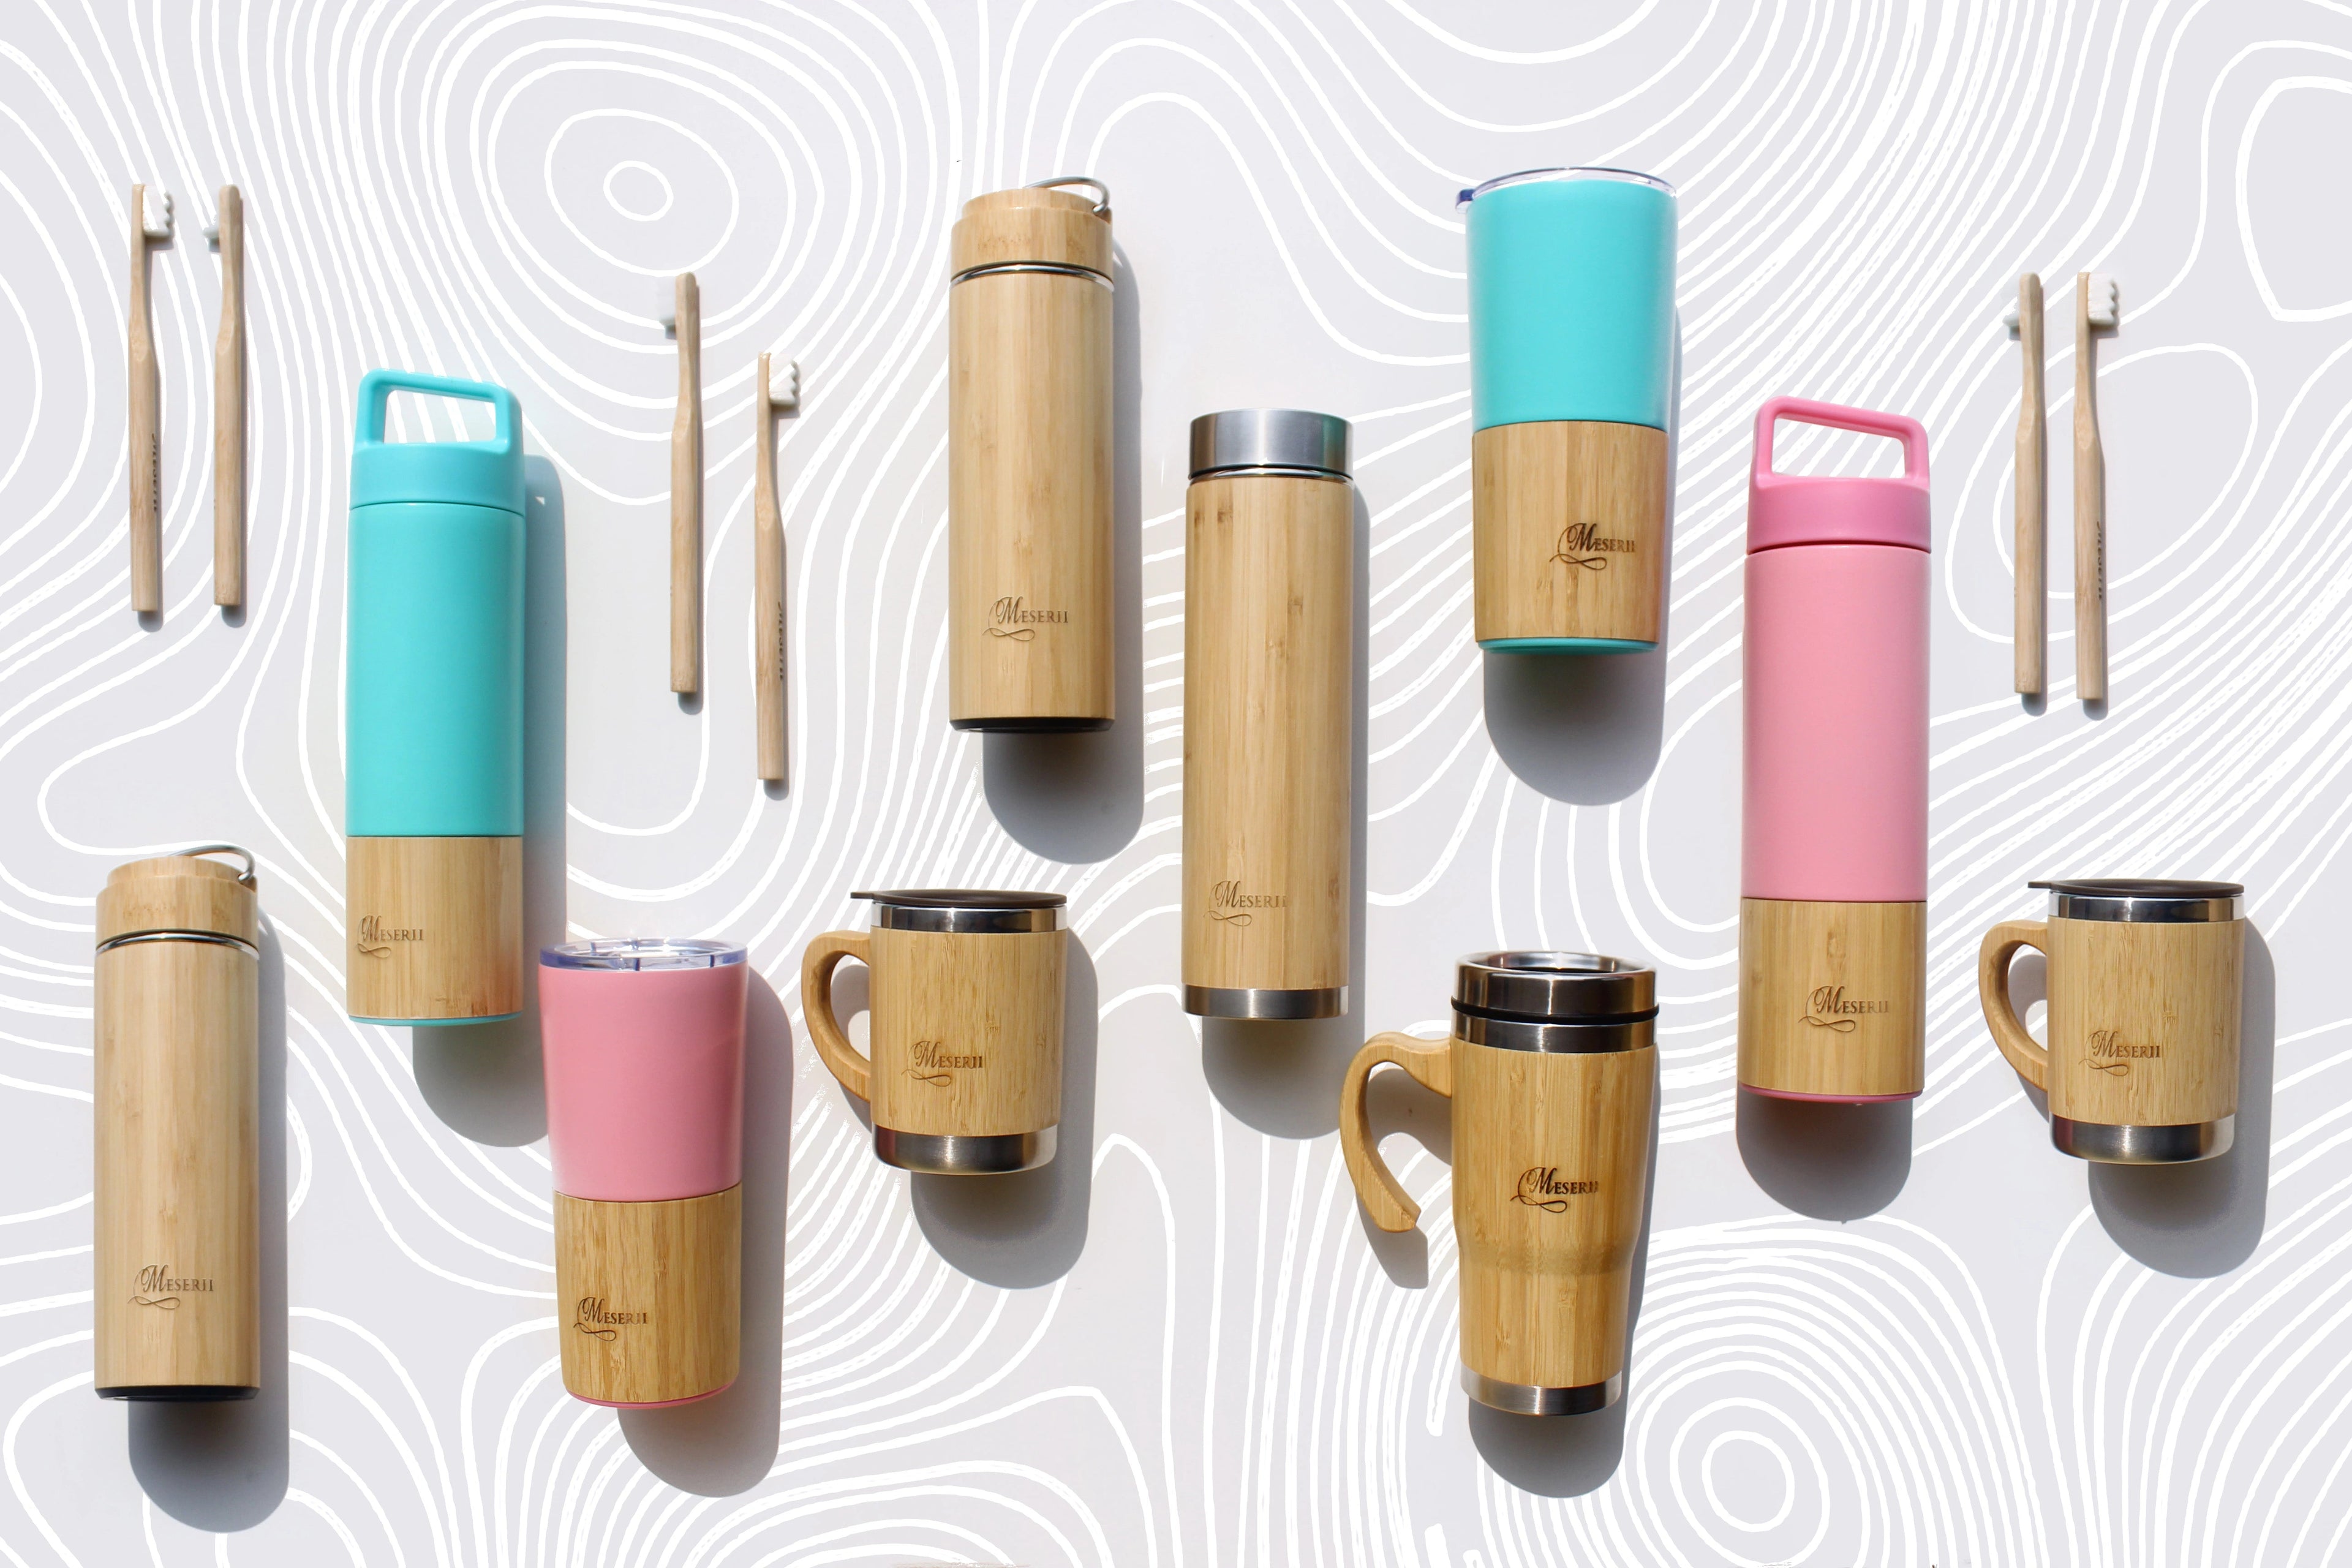 Bamboo Products by Meserii